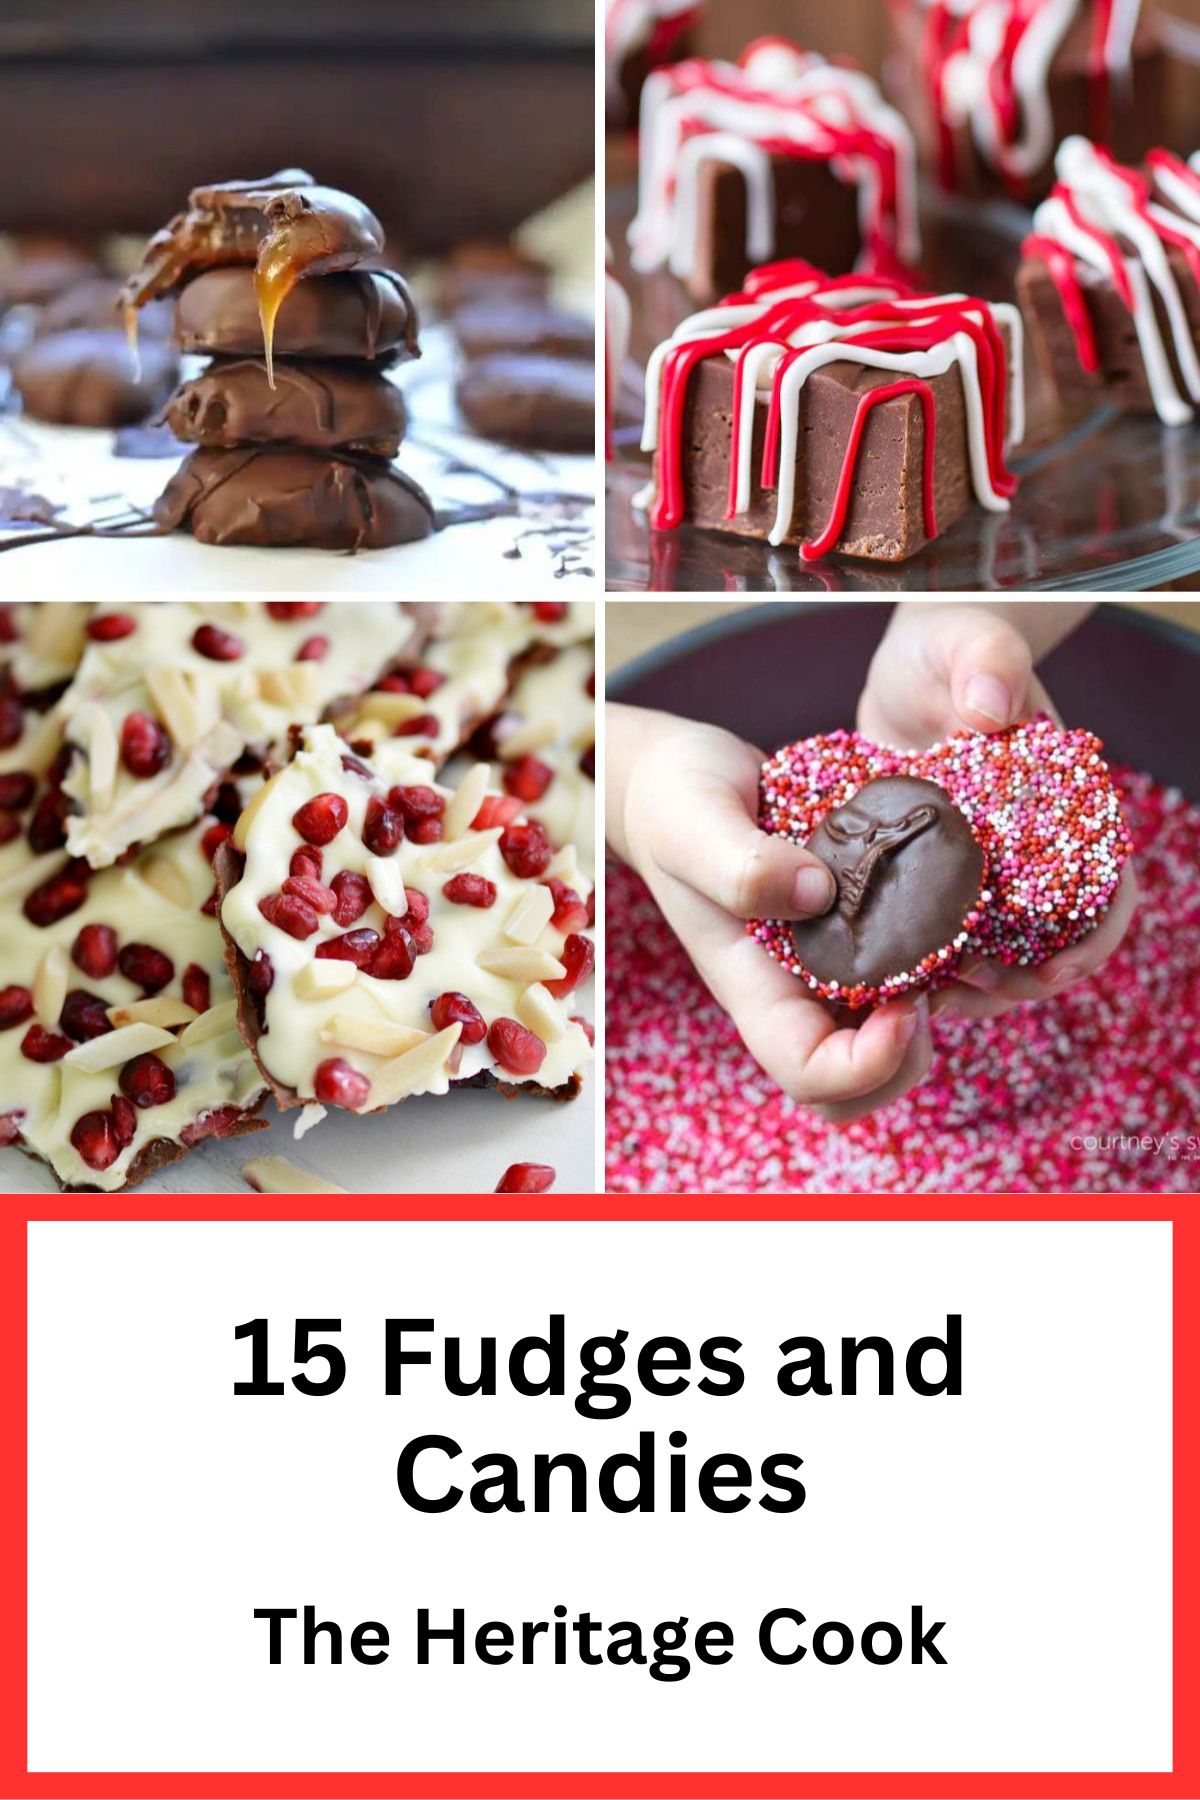 A collection of the 15 best fudge and candy recipes from some of my most talented blogger friends; Recipe collection compiled by Jane Bonacci, The Heritage Cook 2023